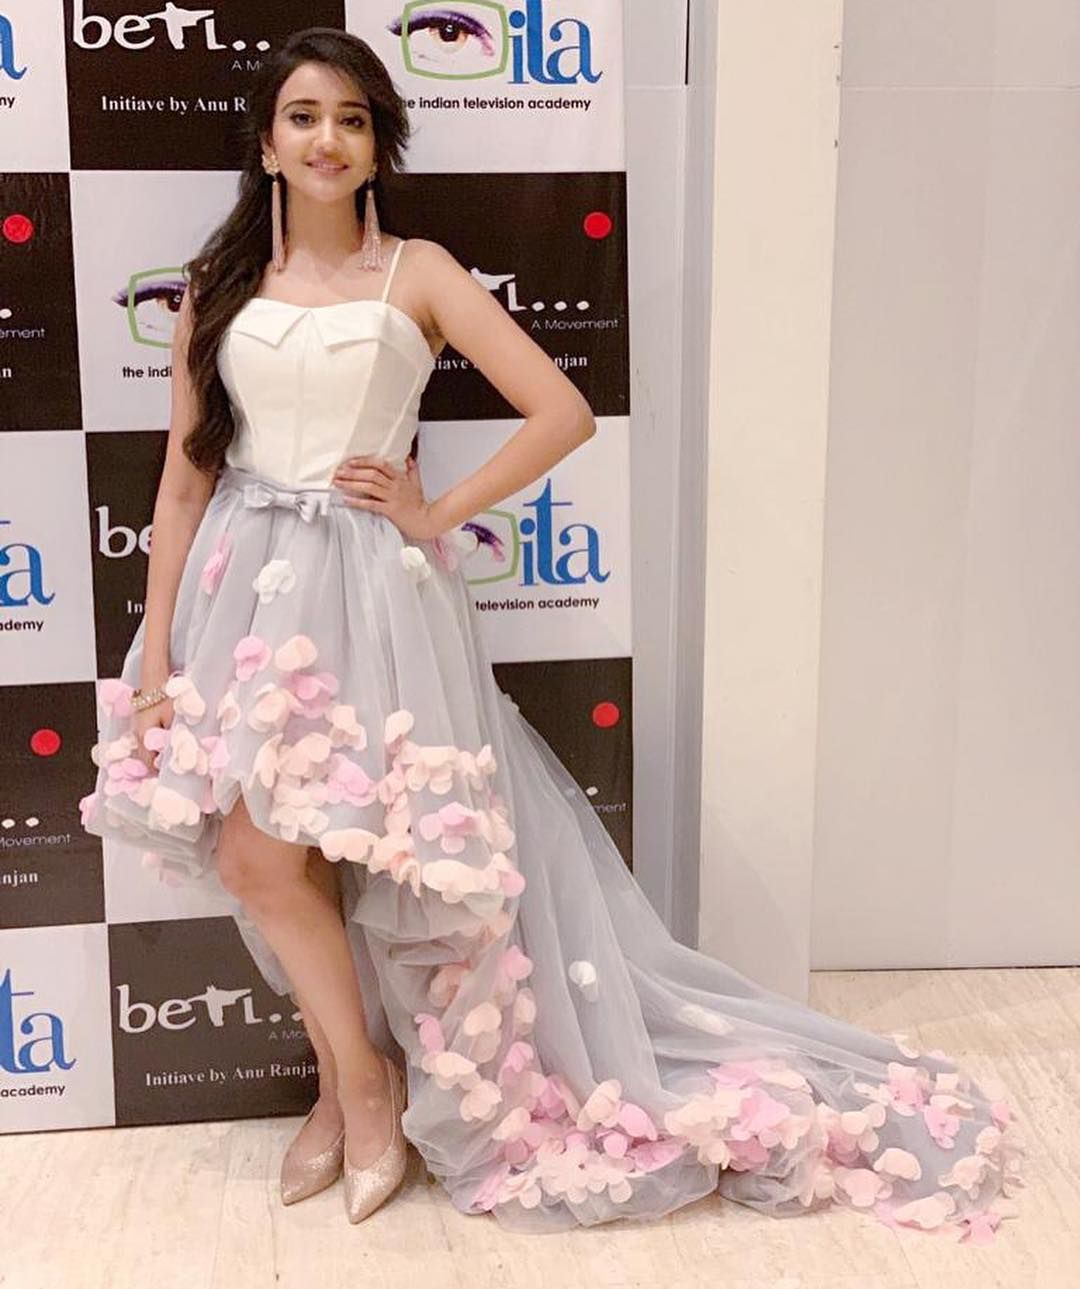 Ashi Singh, Ashnoor Kaur And Mithila Palkar's Embellished Printed Outfit Pictures Goes Viral 2